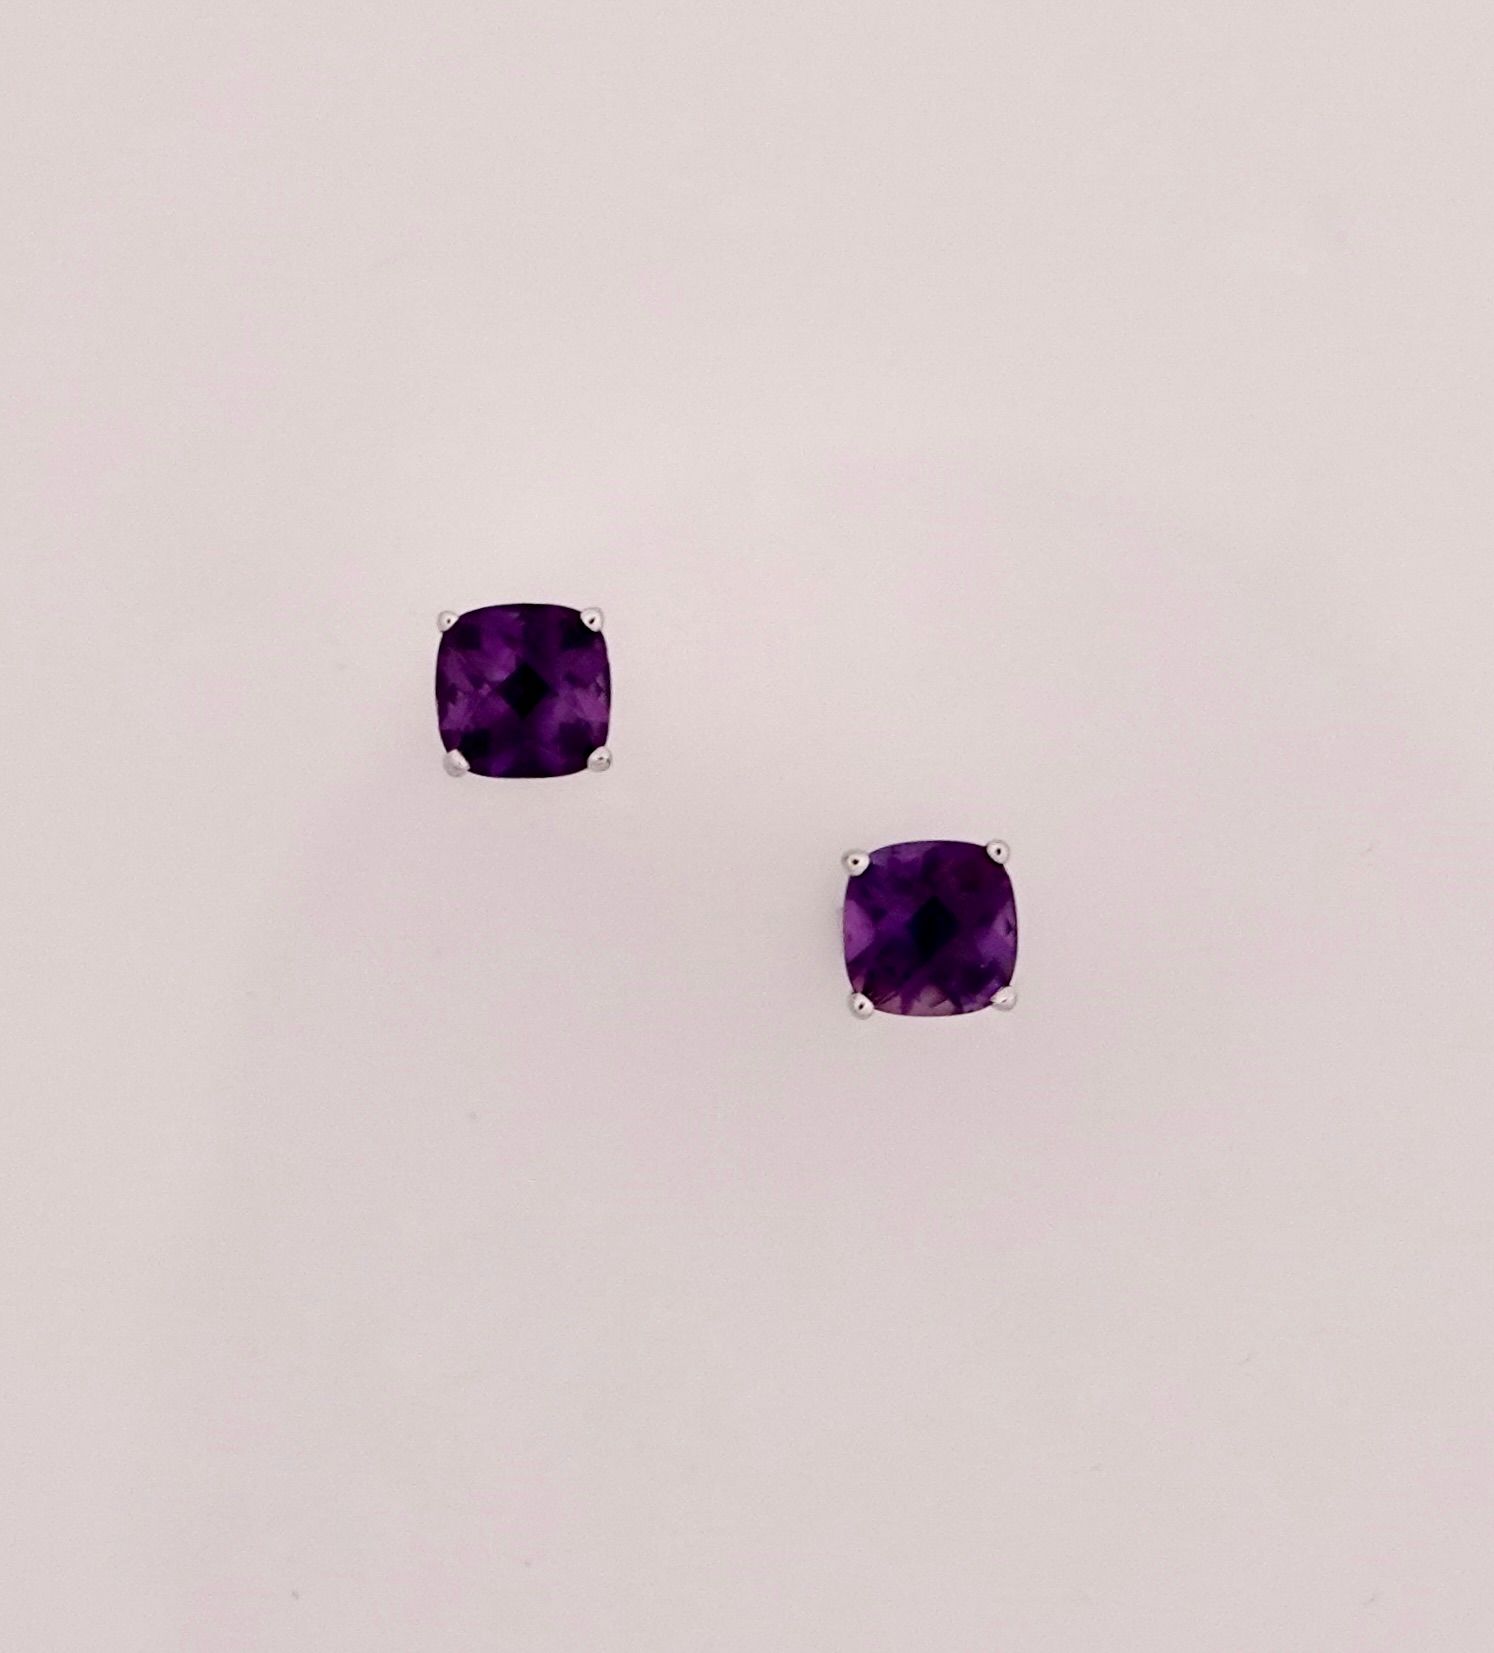 Null Earrings in white gold, 750 MM, each adorned with a cushion-cut amethyst to&hellip;